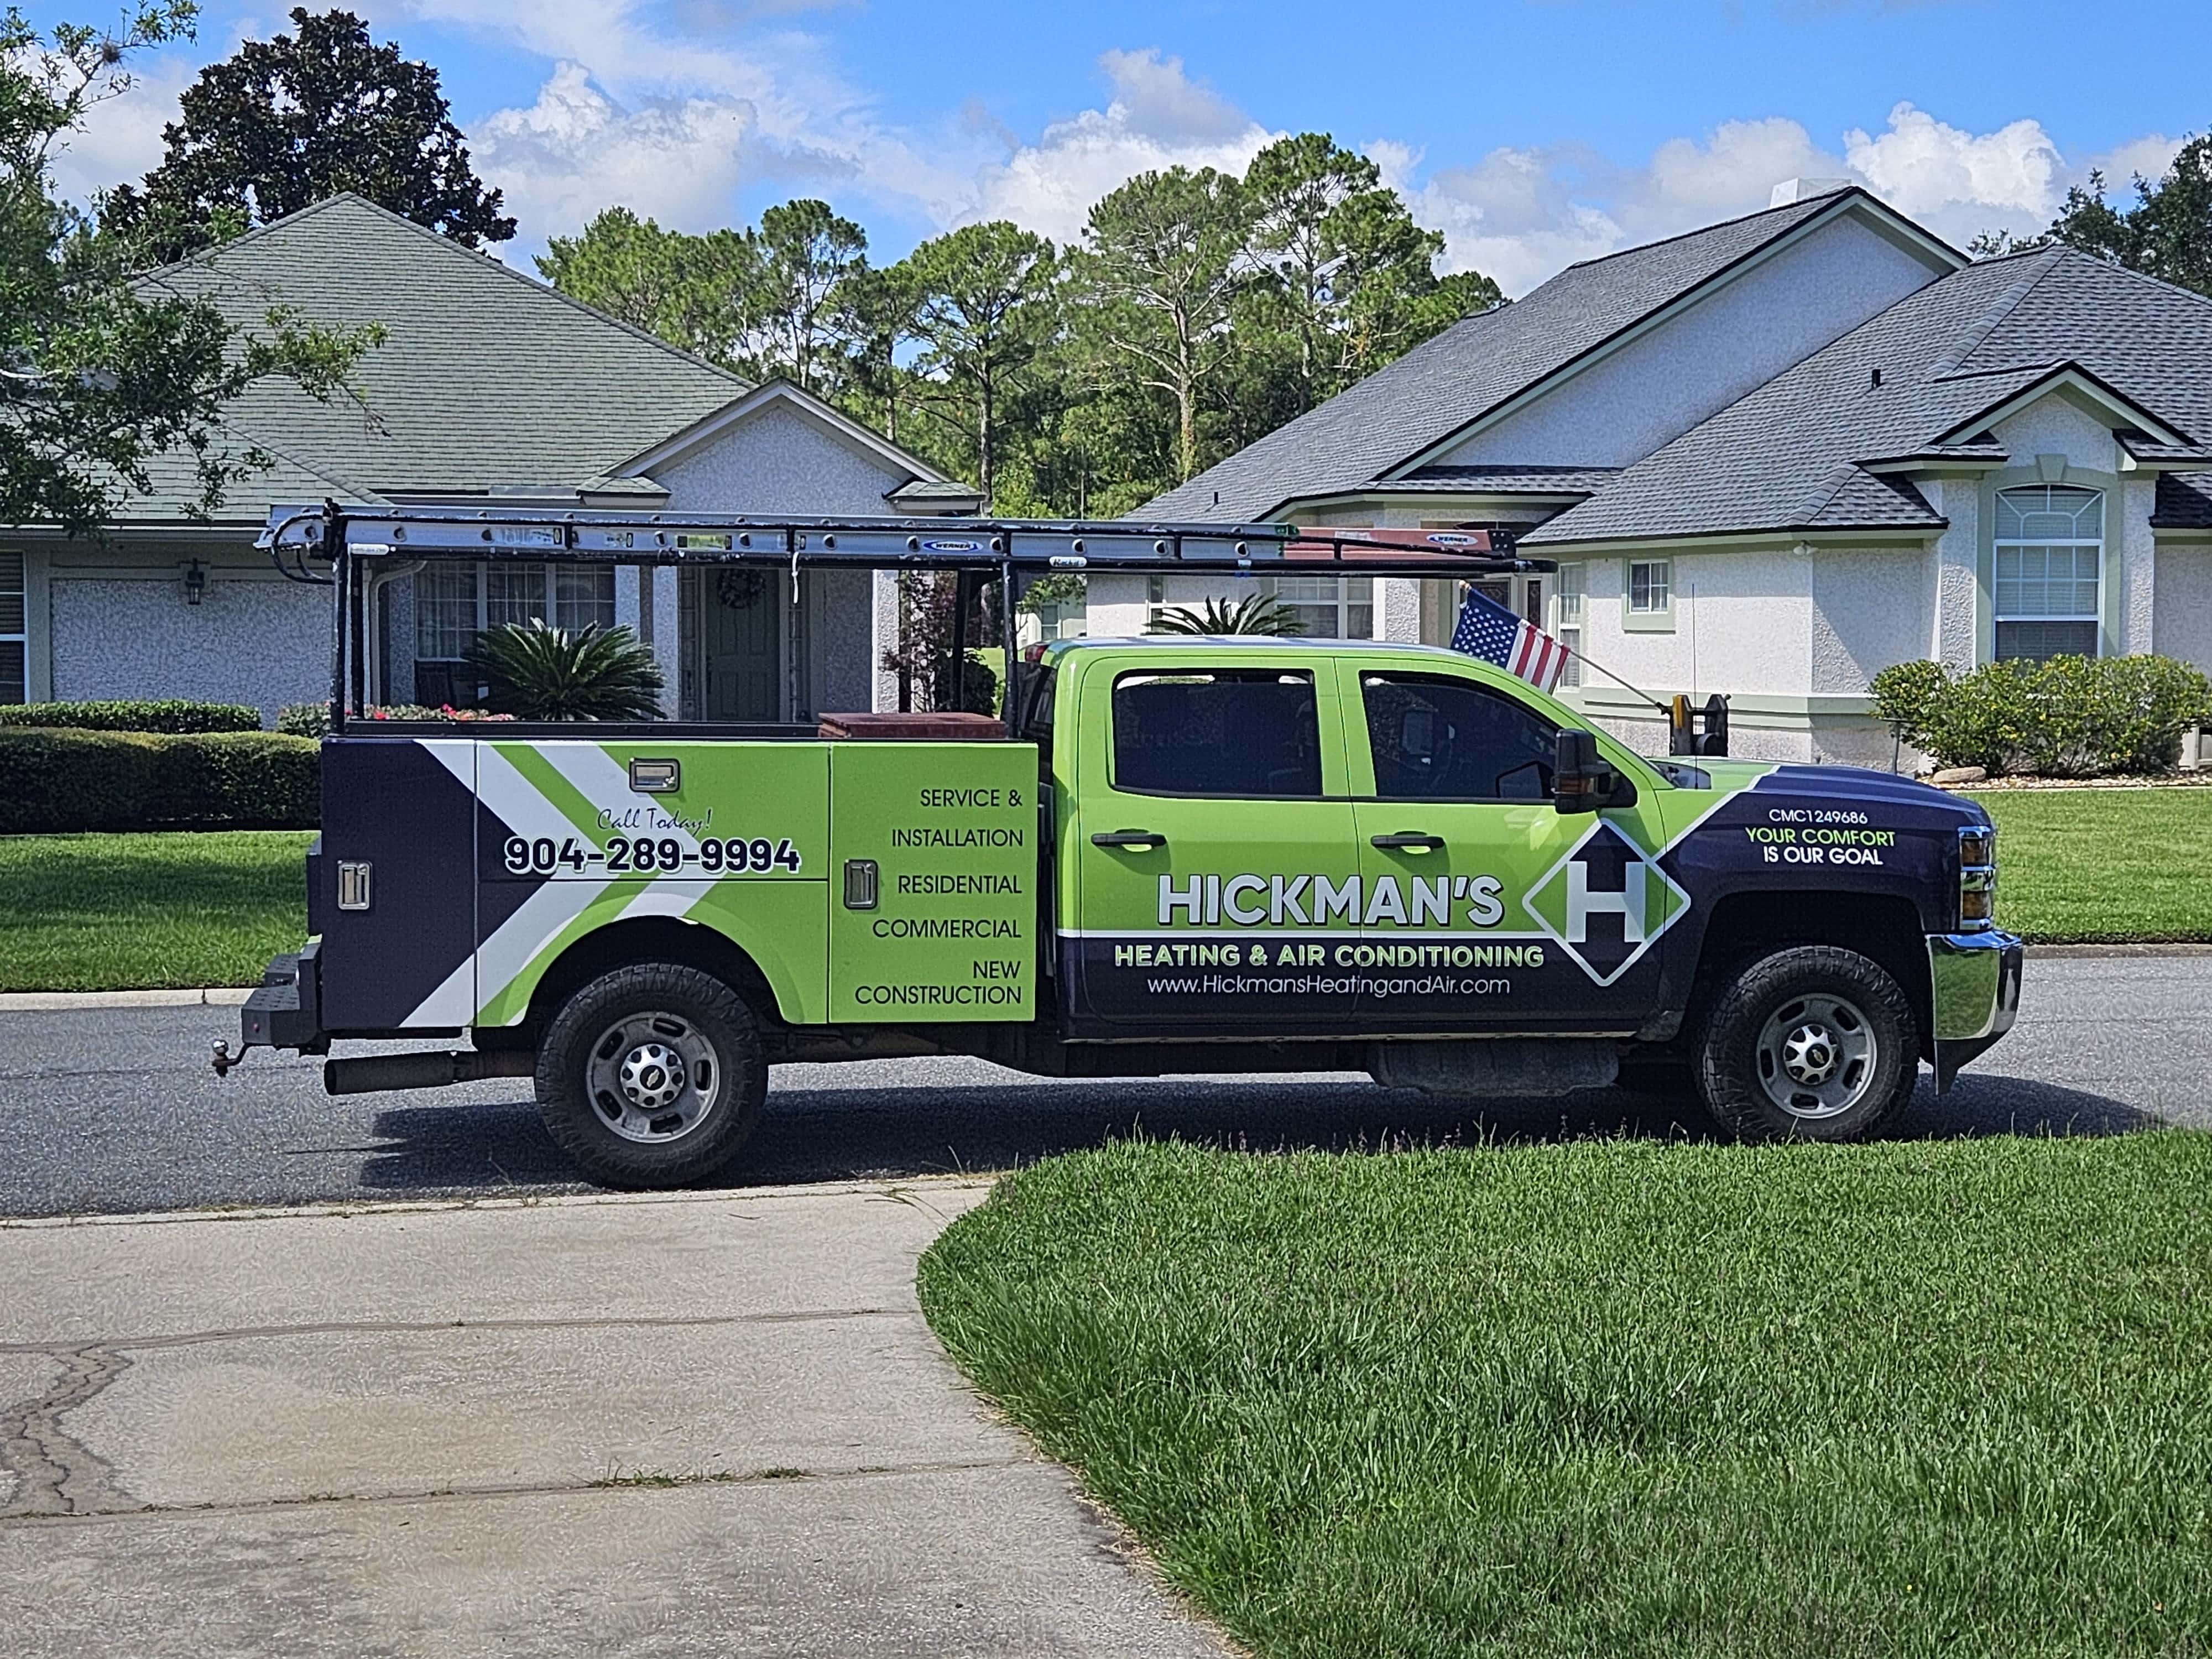 Hickman's Heating & Air Conditioning - Middleburg, FL, US, heating repair